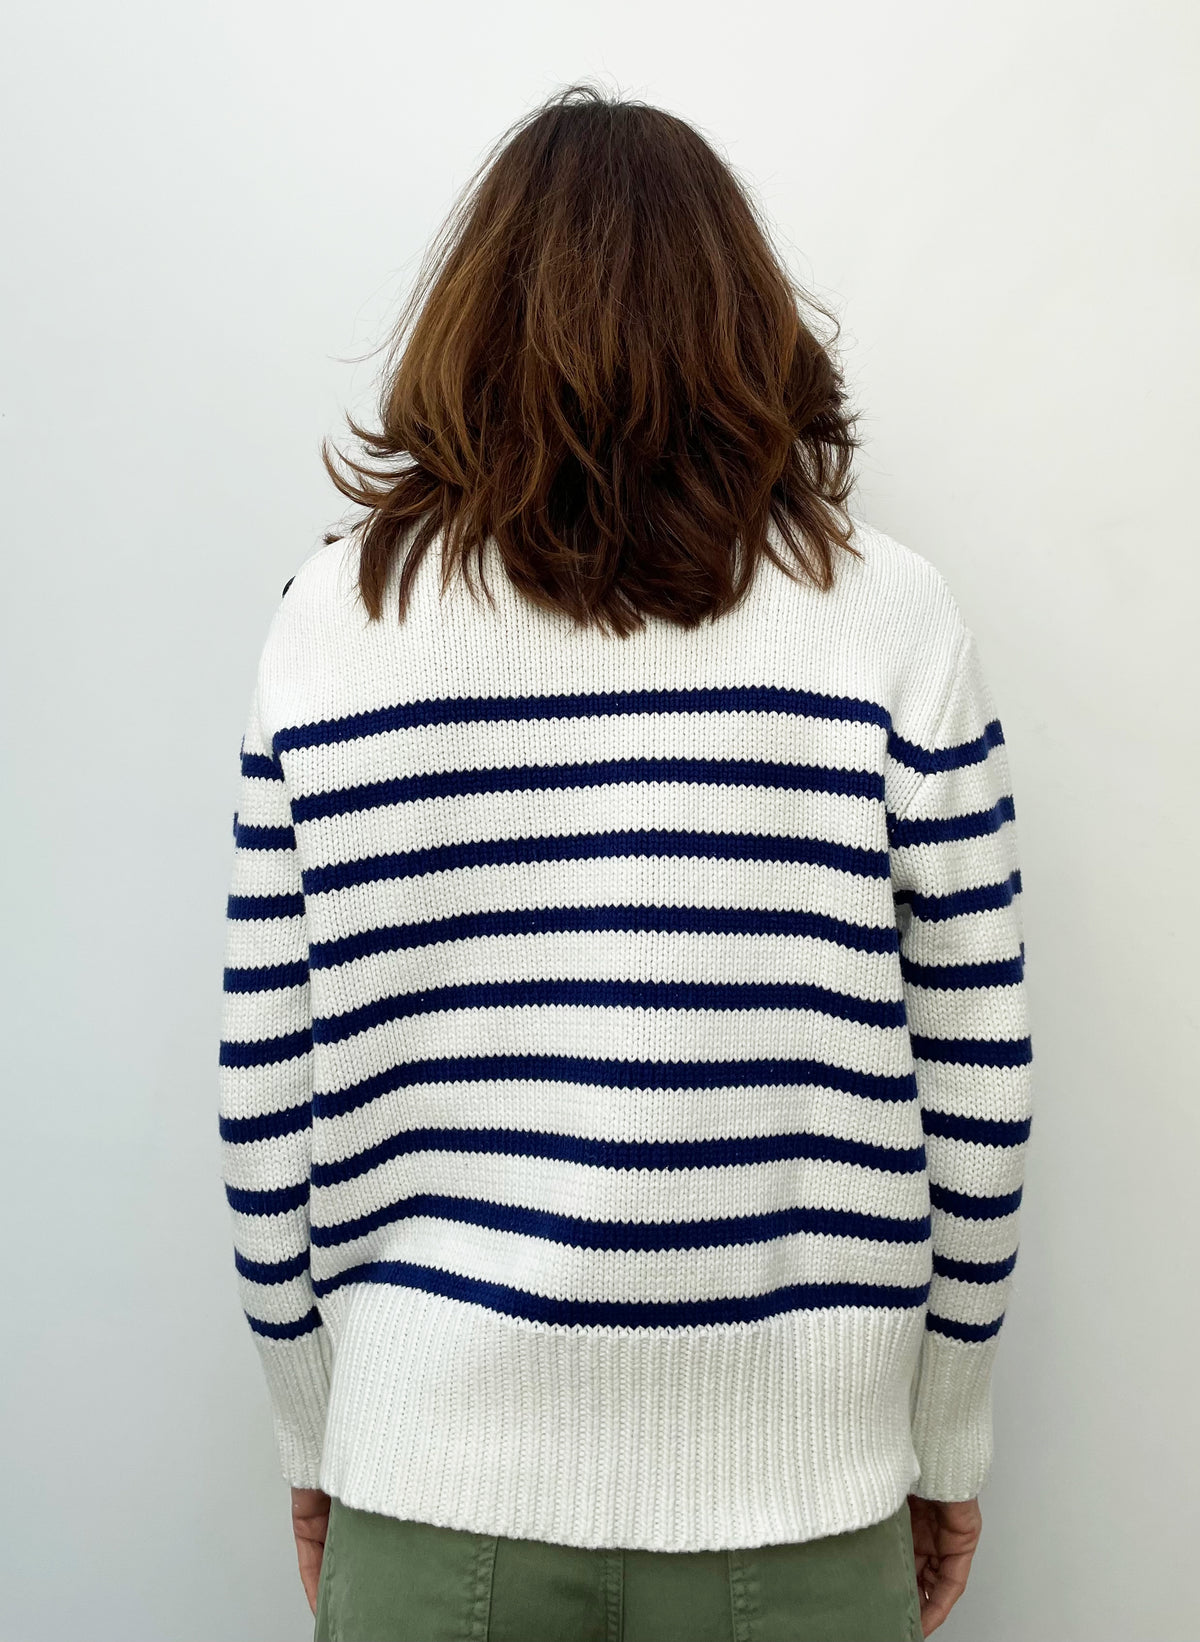 FIVE POE2111 Striped Top in Navy